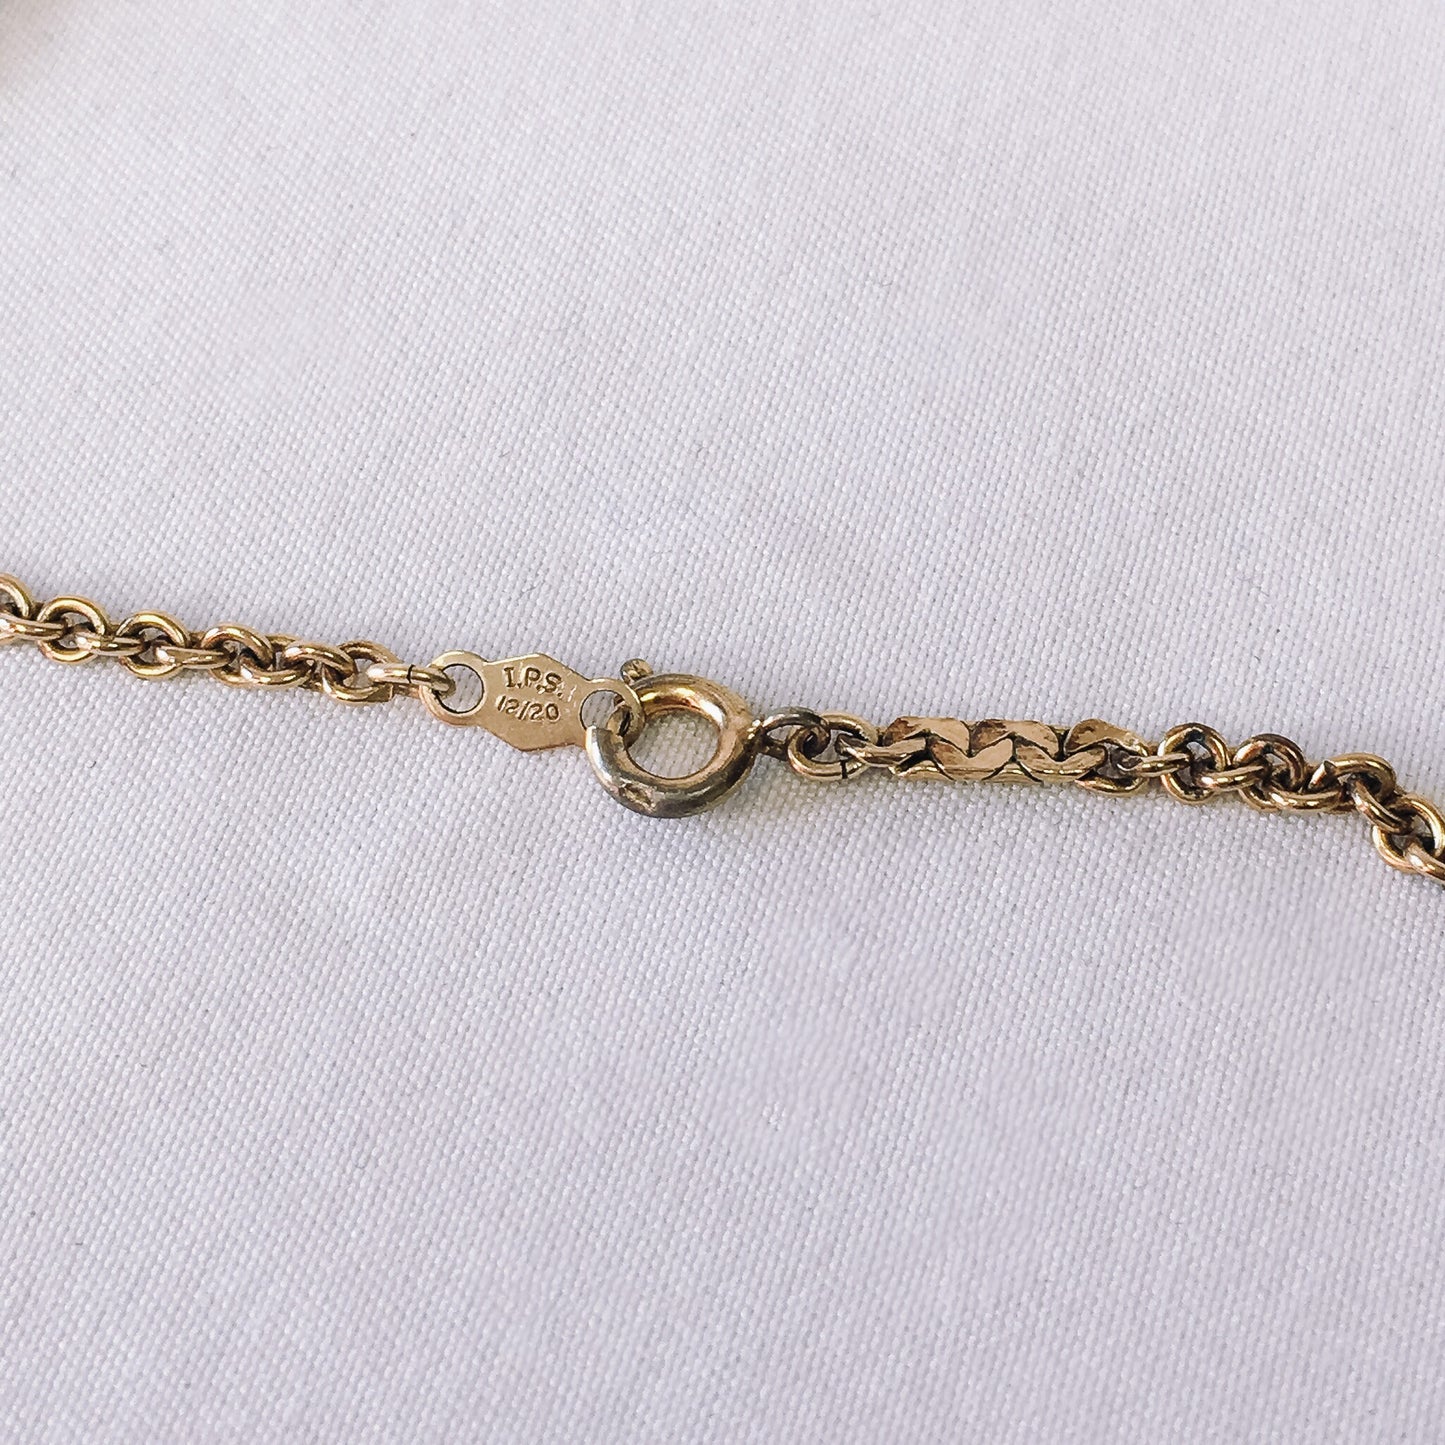 Vintage IPS 12k Gold Filled Necklace with Faux Pearl and Possible Sodalite